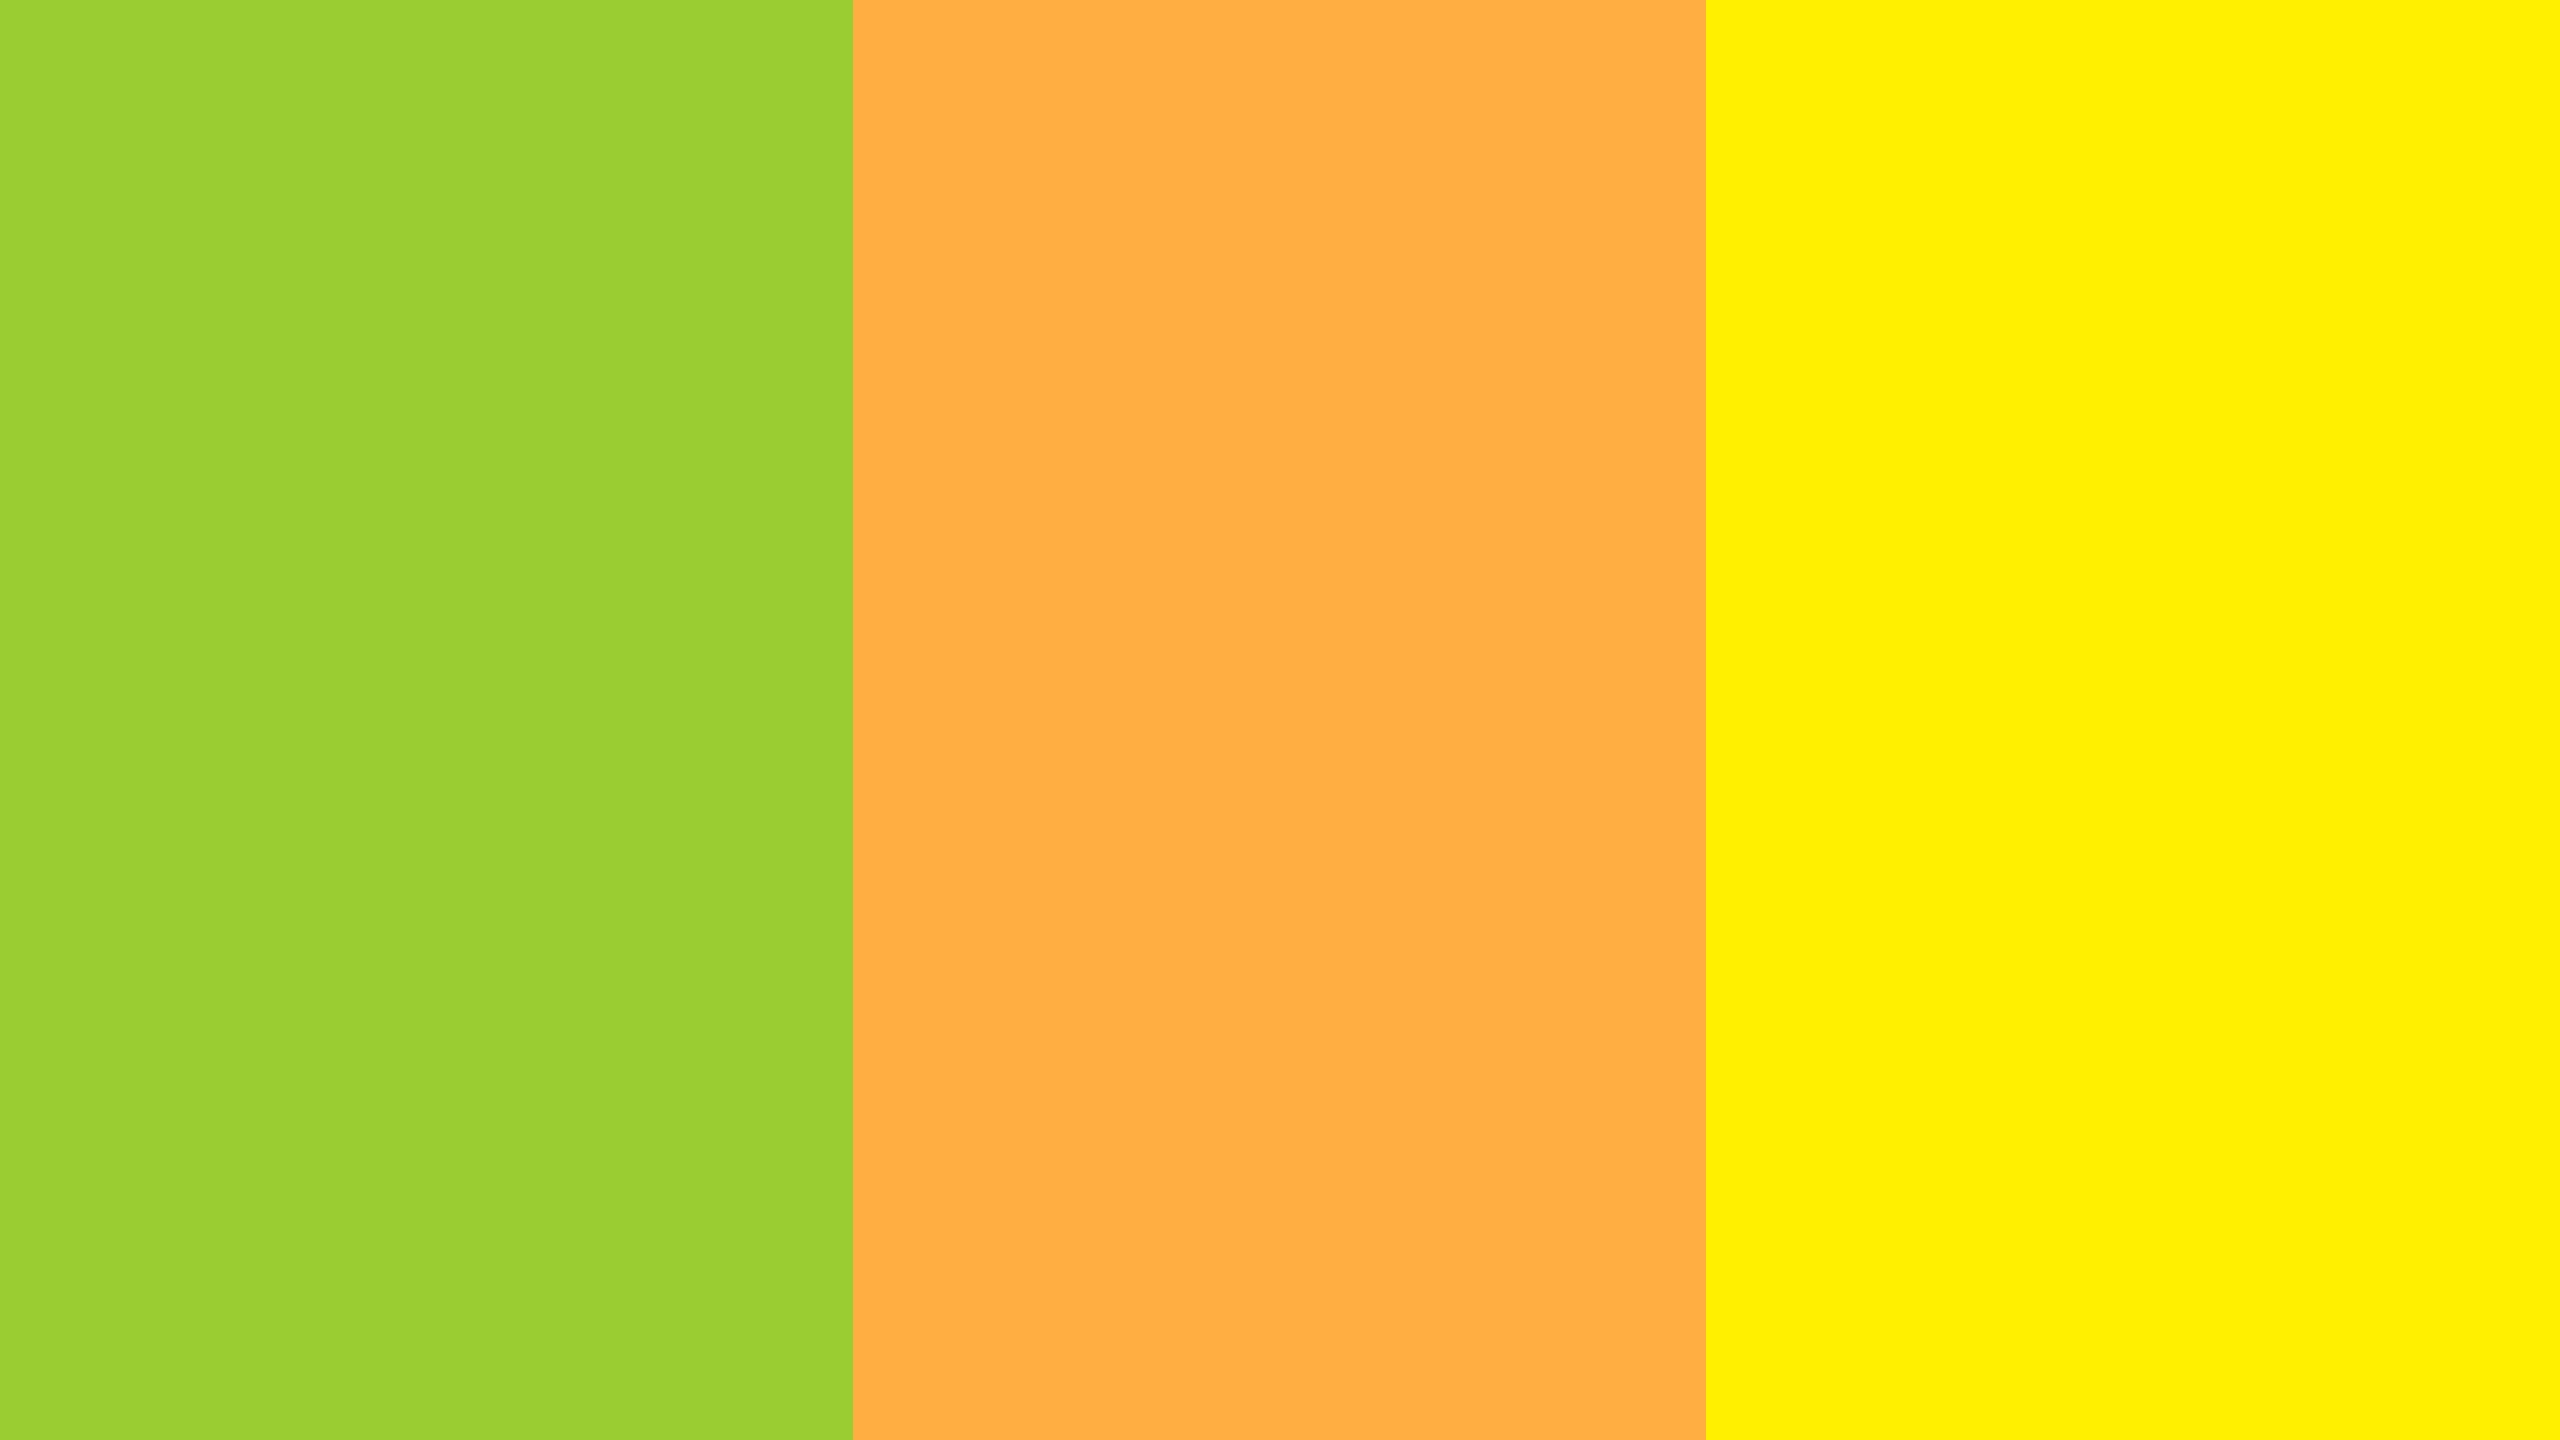  green yellow orange and yellow rose solid three color background